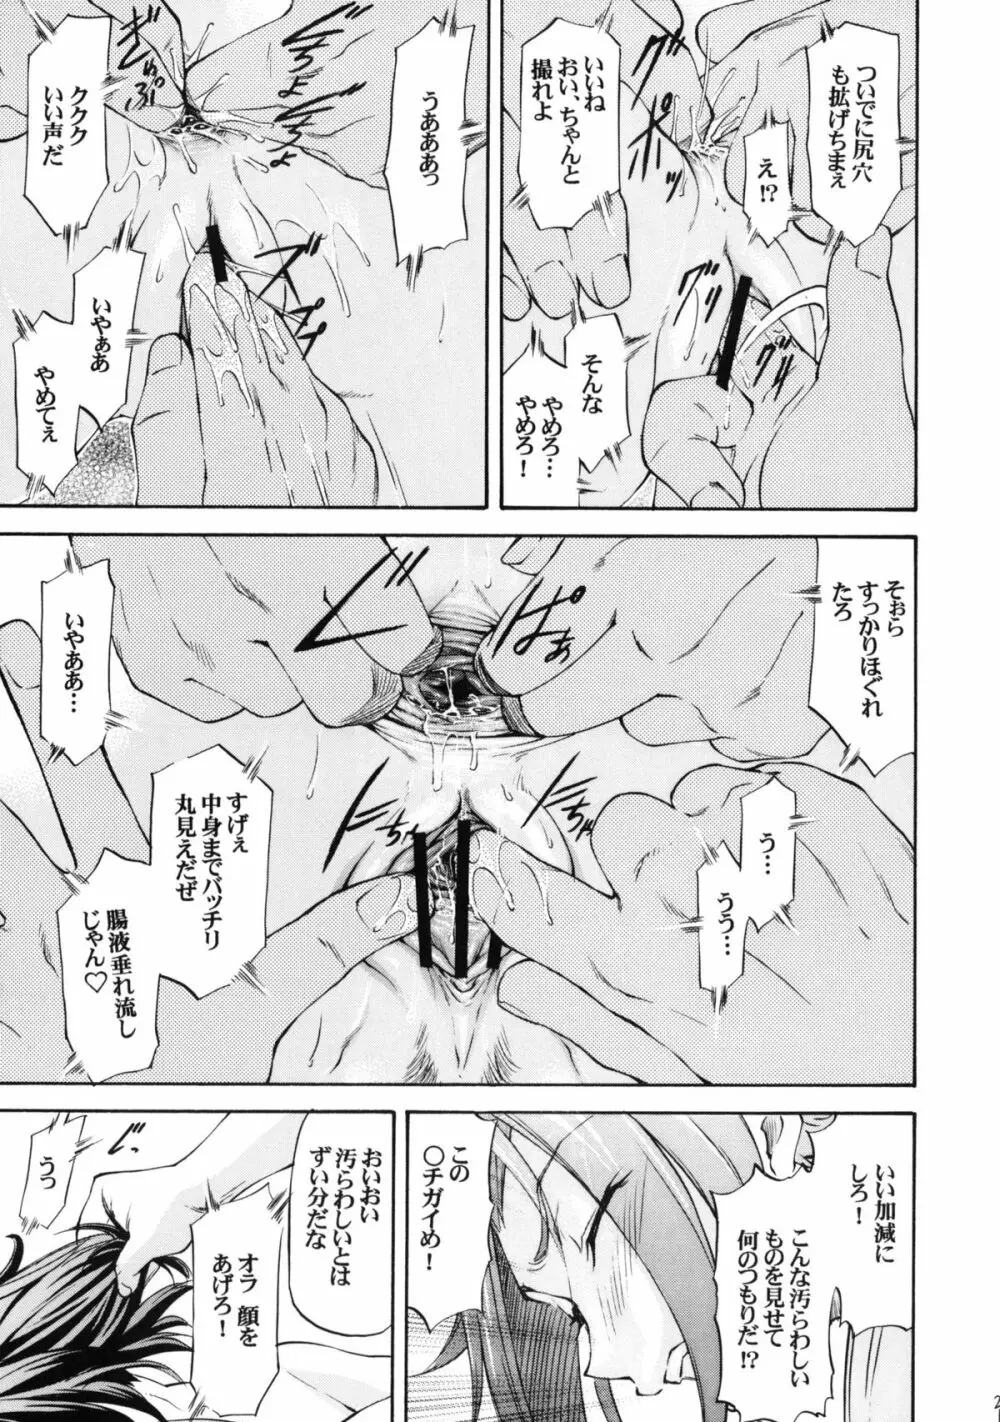 LeLeぱっぱ Vol.16 Re;Re; - page22